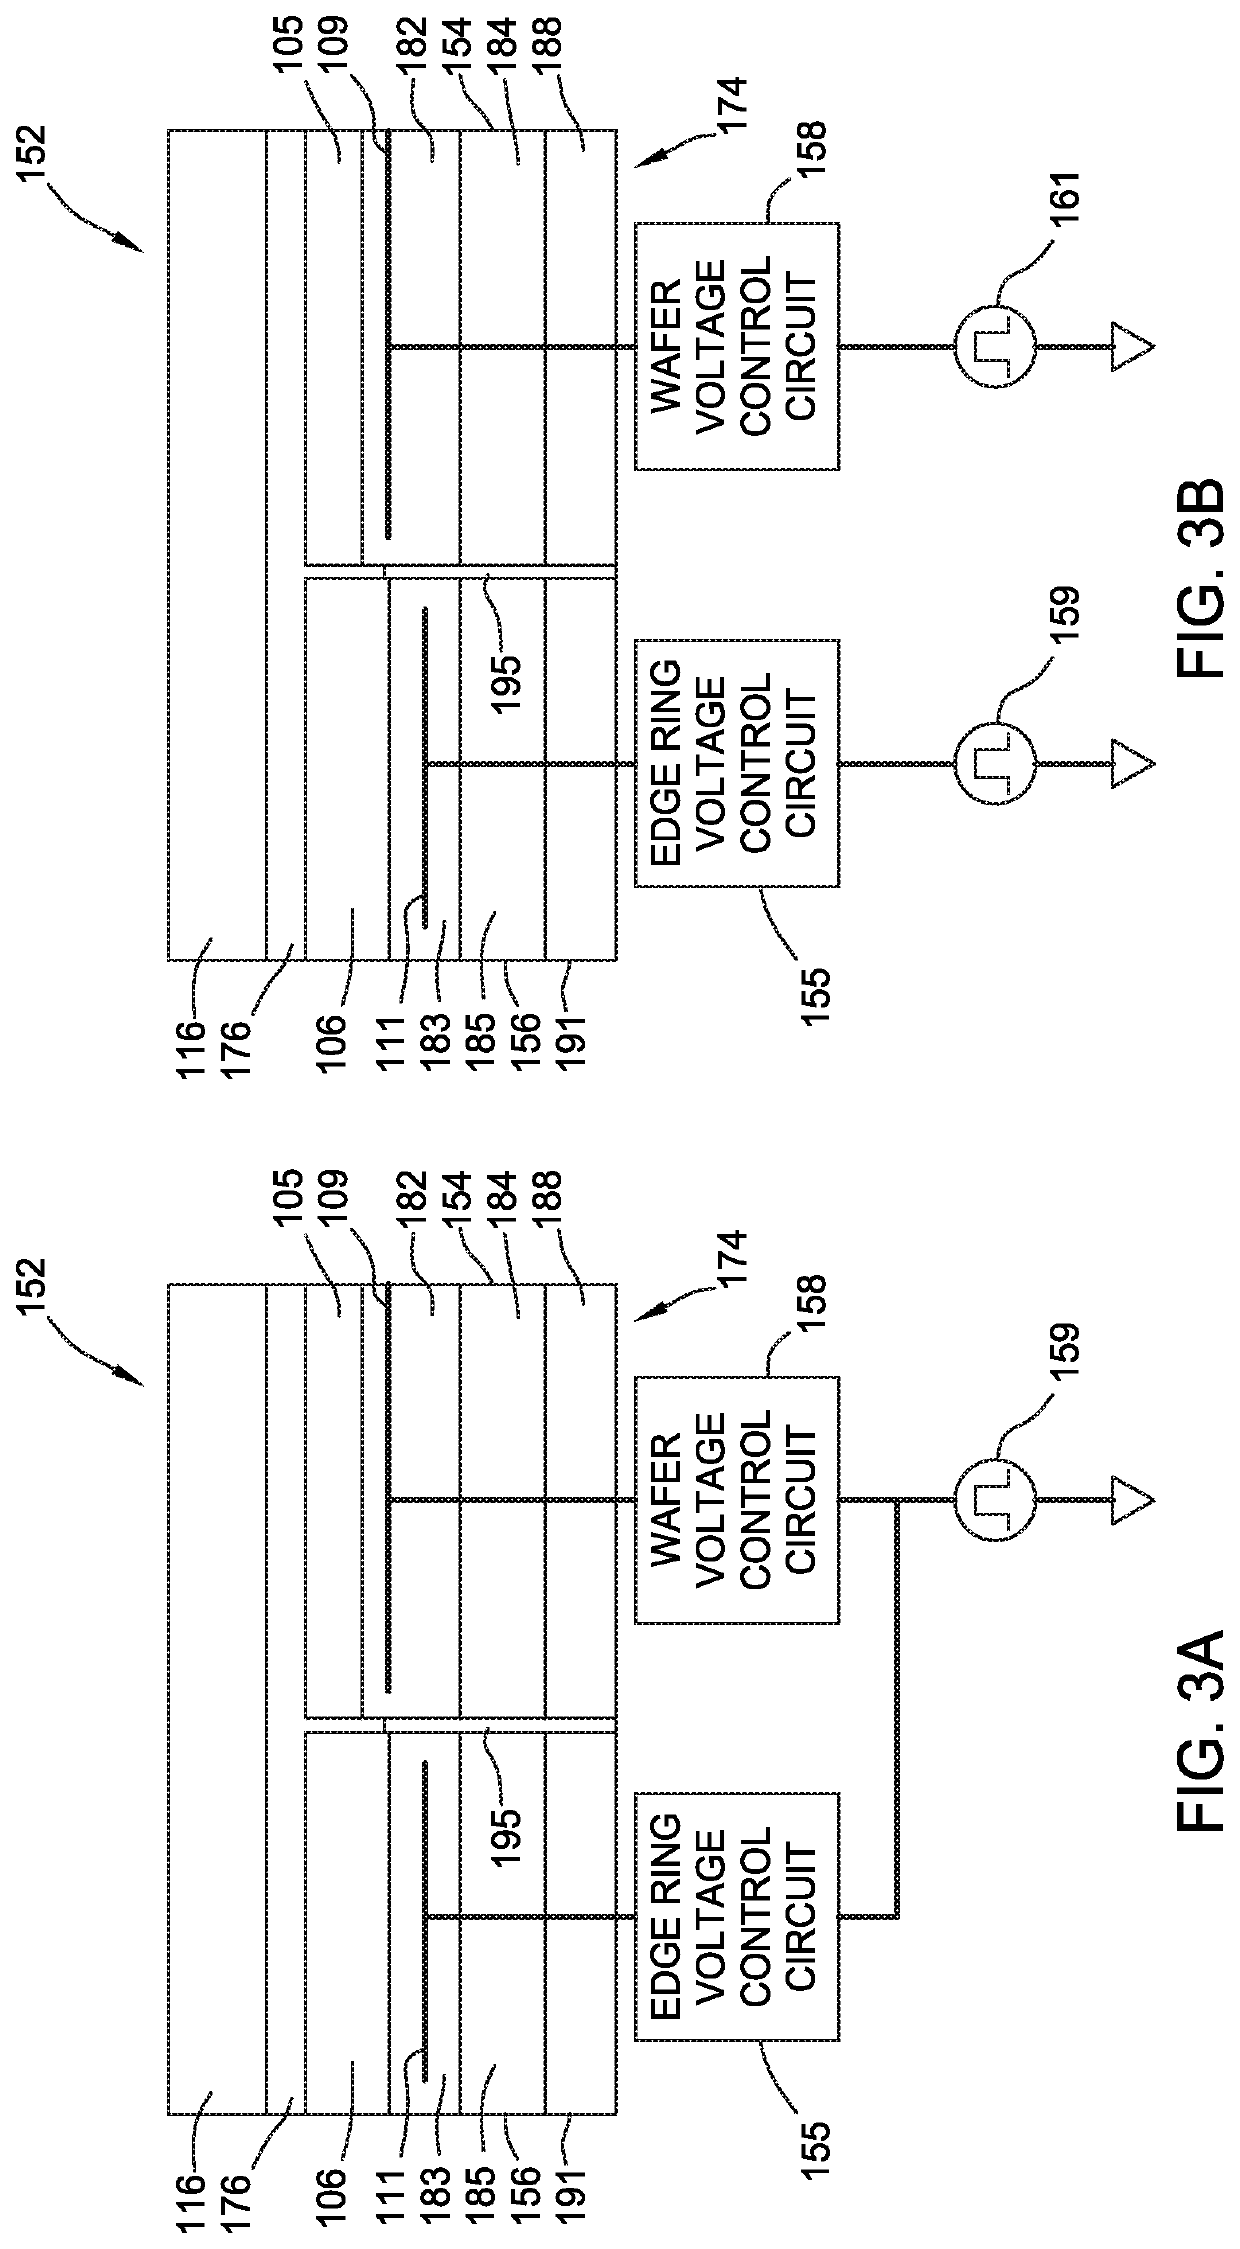 Circuits for edge ring control in shaped DC pulsed plasma process device